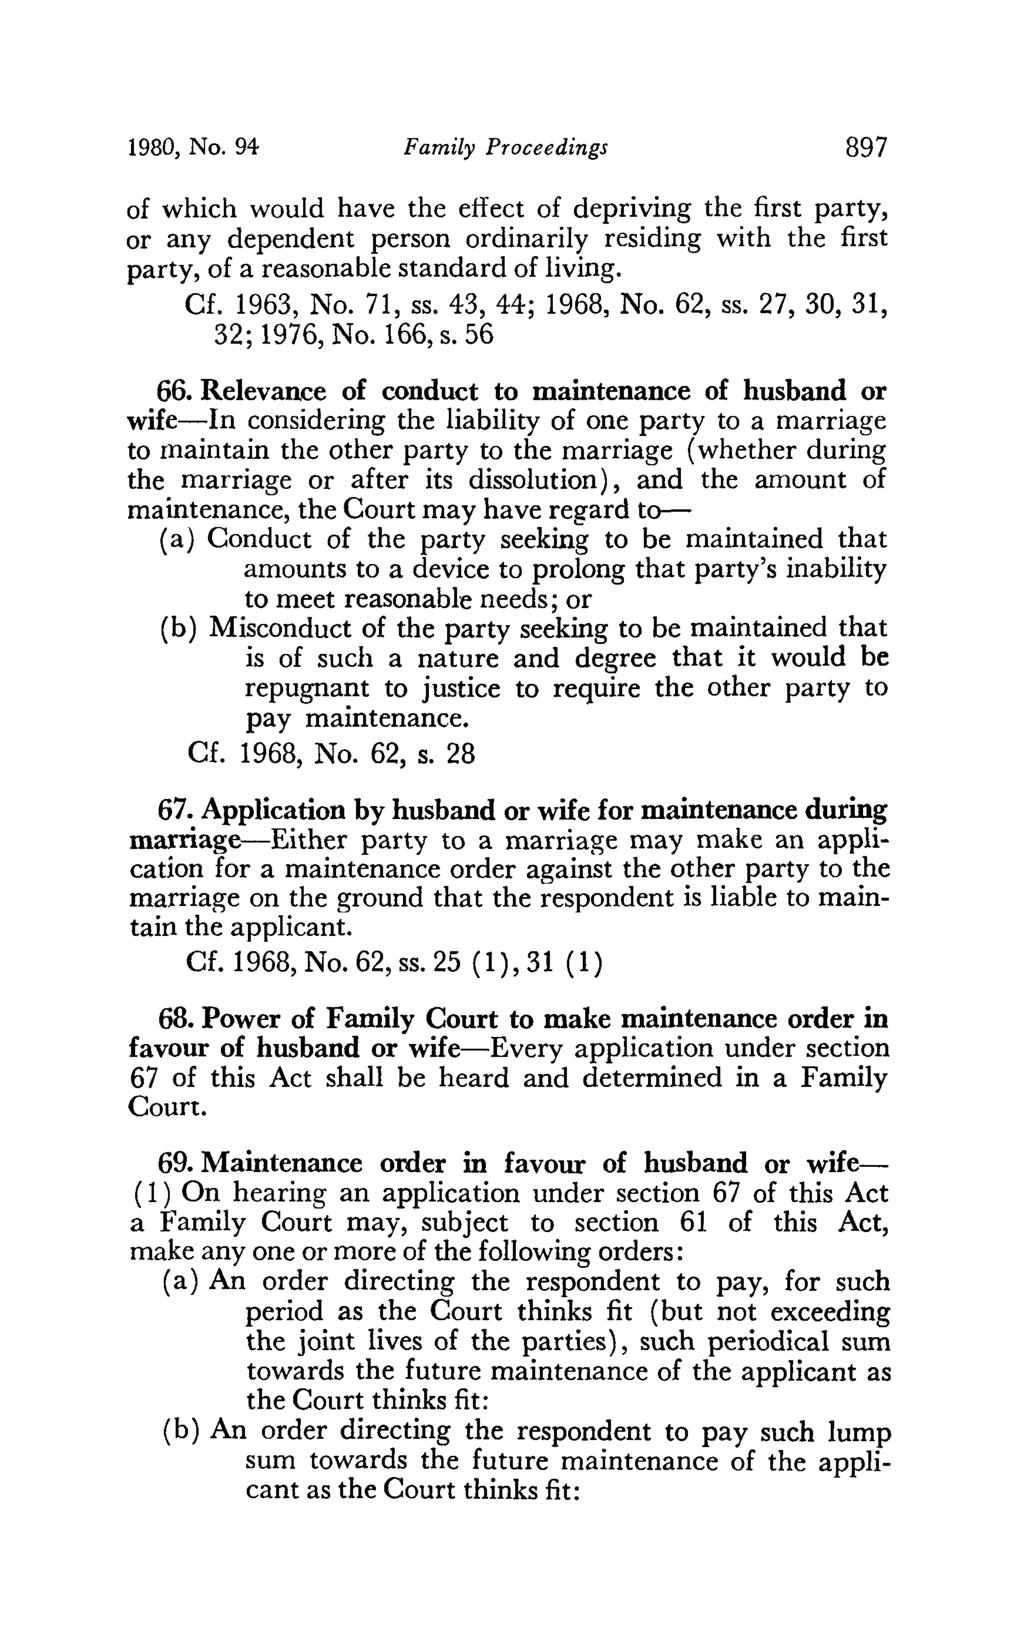 1980, No. 94 Family Proceedings 897 of which would have the effect of depriving the first party, or any dependent person ordinarily residing with the first party, of a reasonable standard of living.